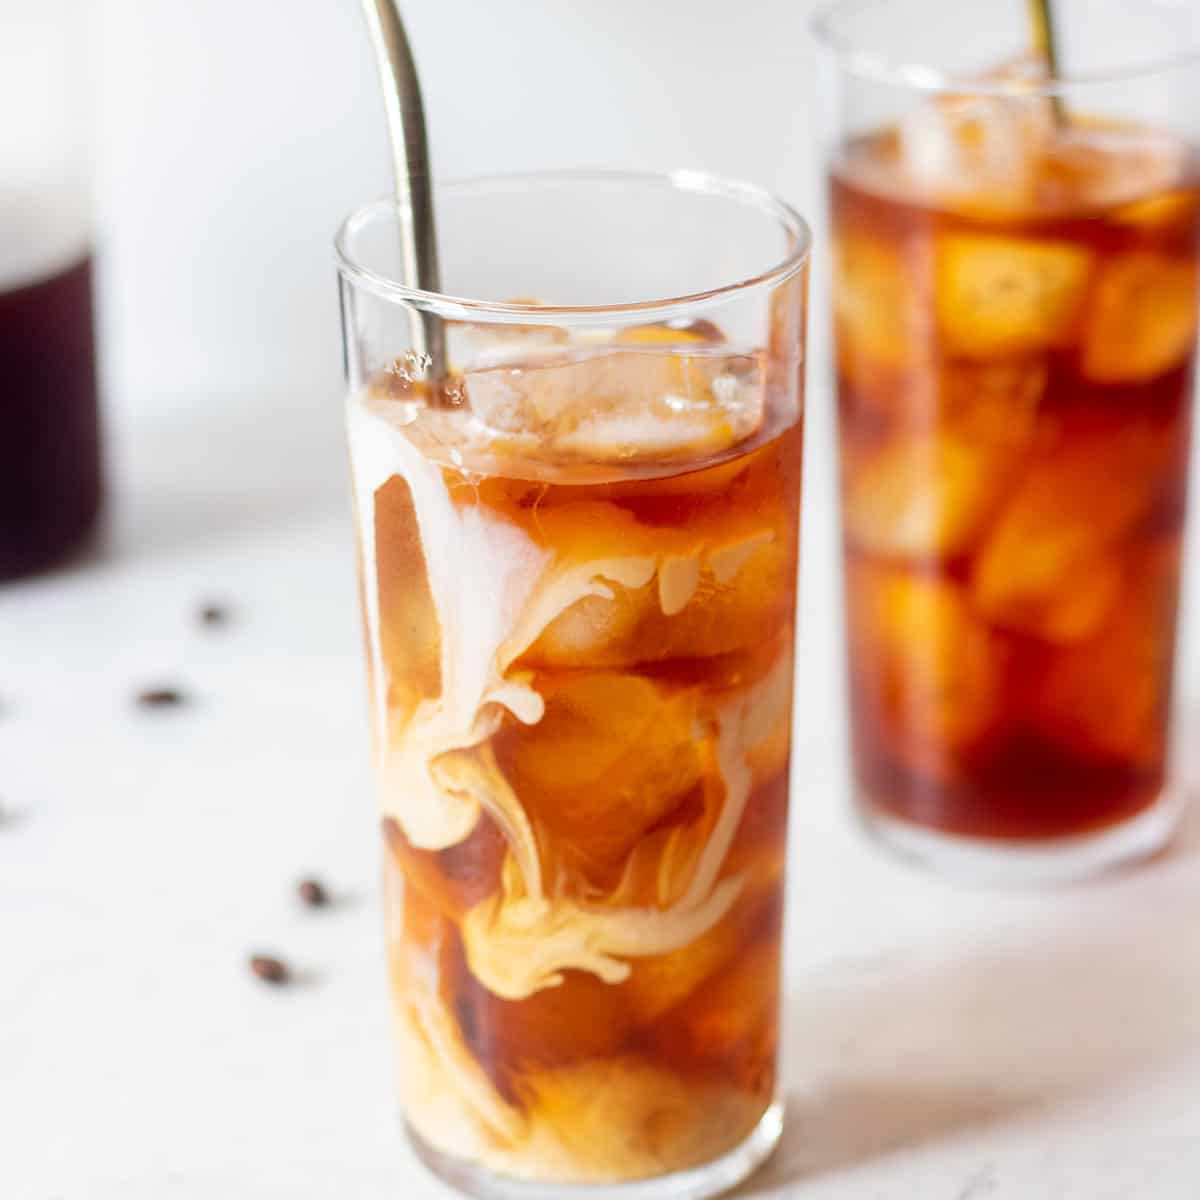 cold brew coffee in a clear glass with half and half cream, ice and a stainless steel straw.